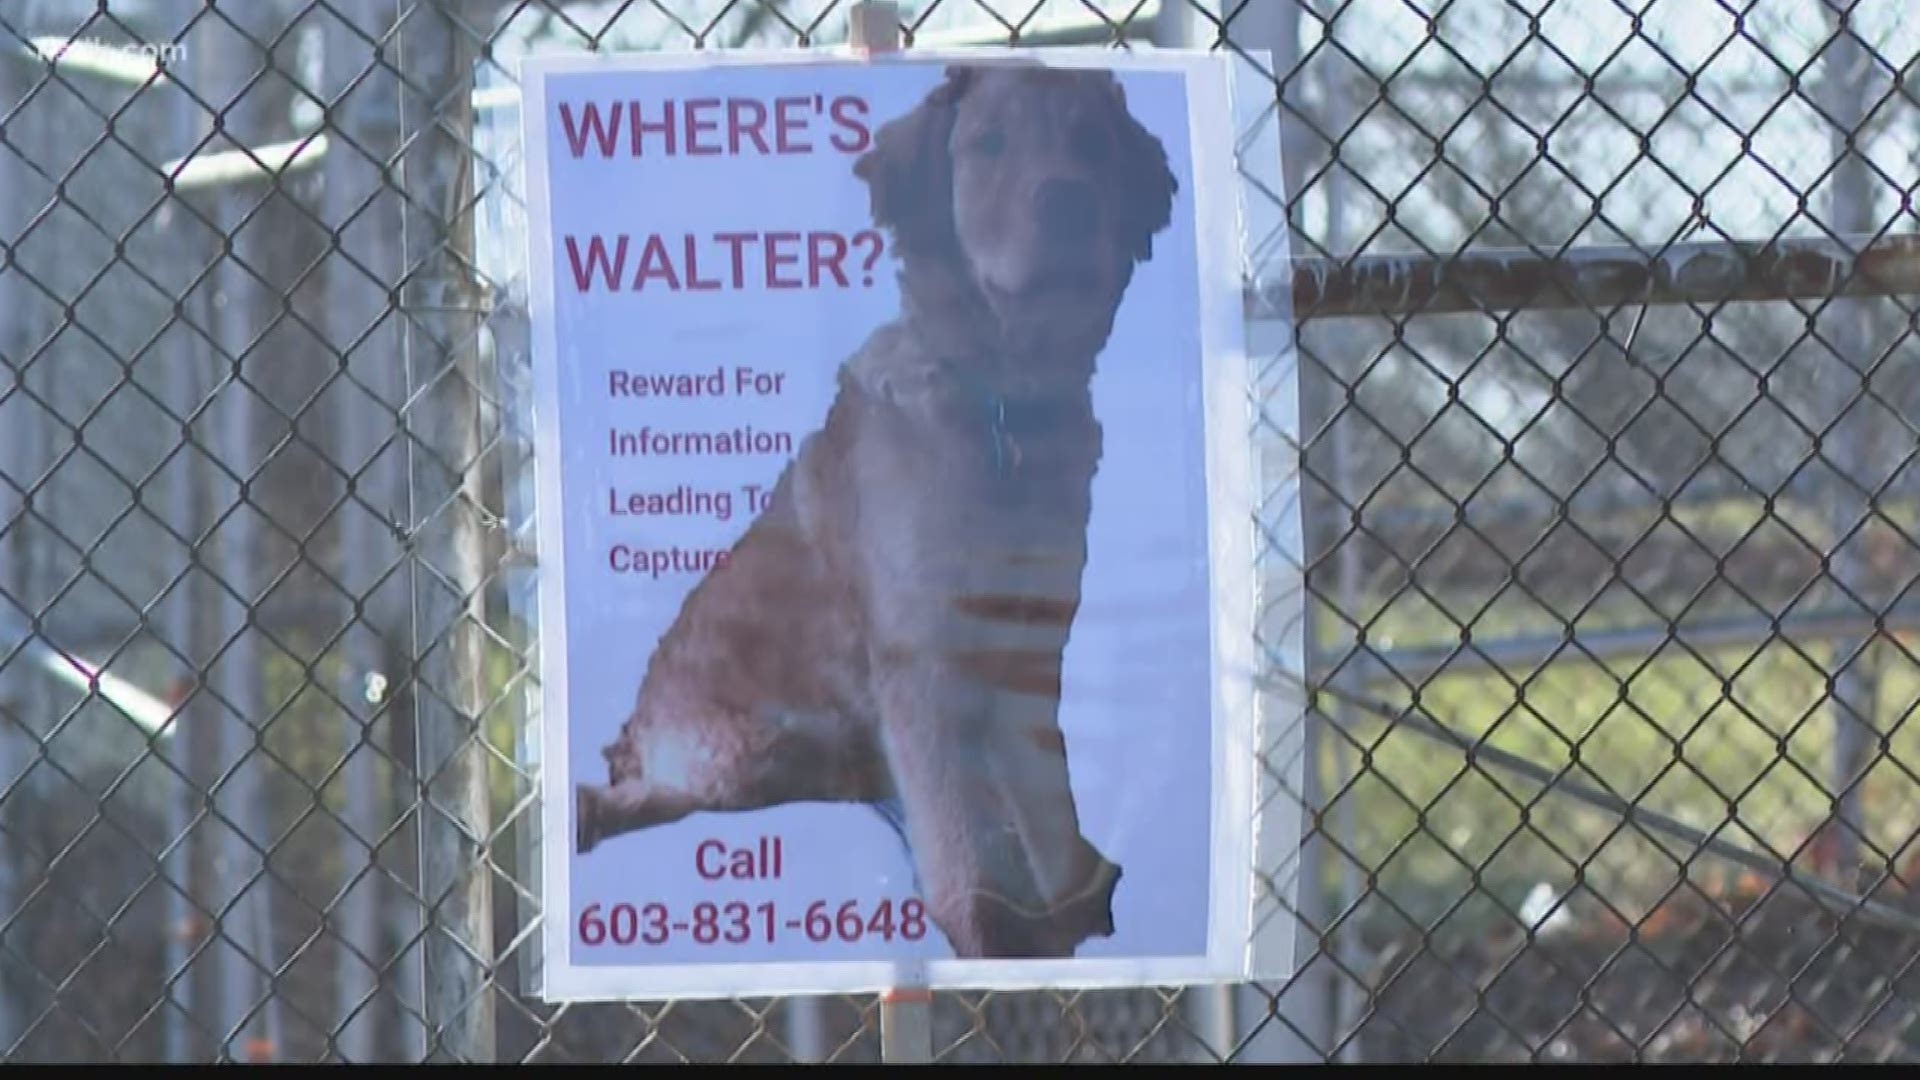 Kate Olson is from New Hampshire but has spent most of the last month in St. Louis desperately searching for her dog Walter.